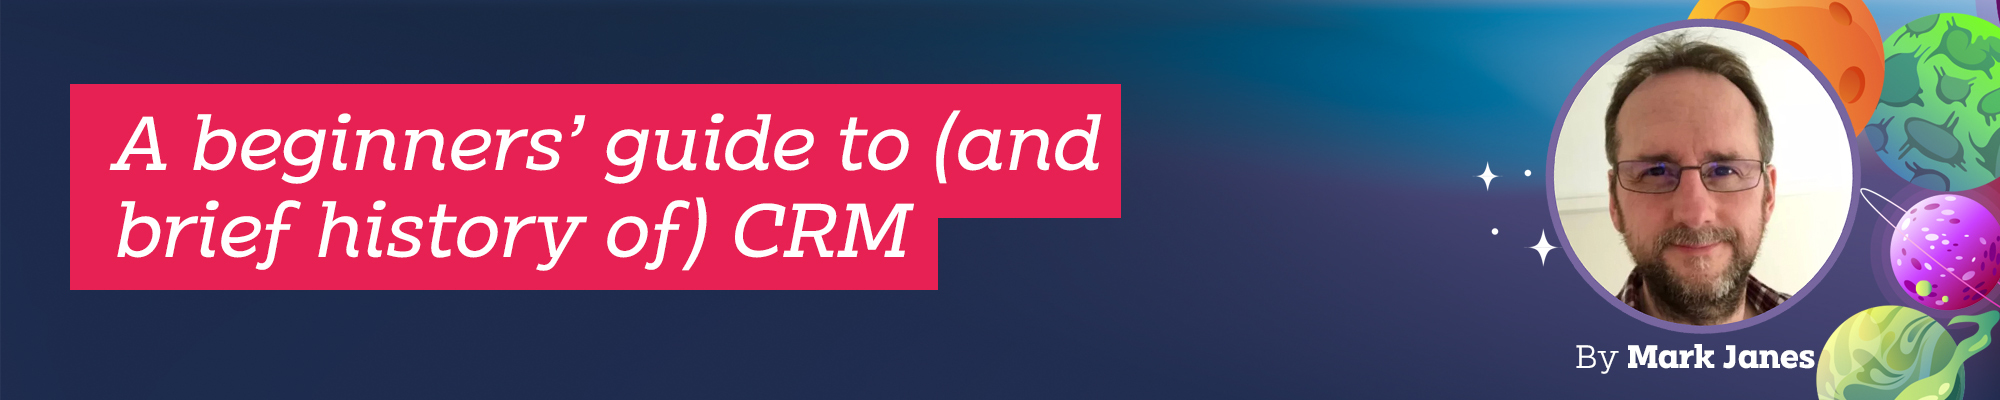 Mark - A beginners’ guide to (and brief history of) CRM - Anicca Banner